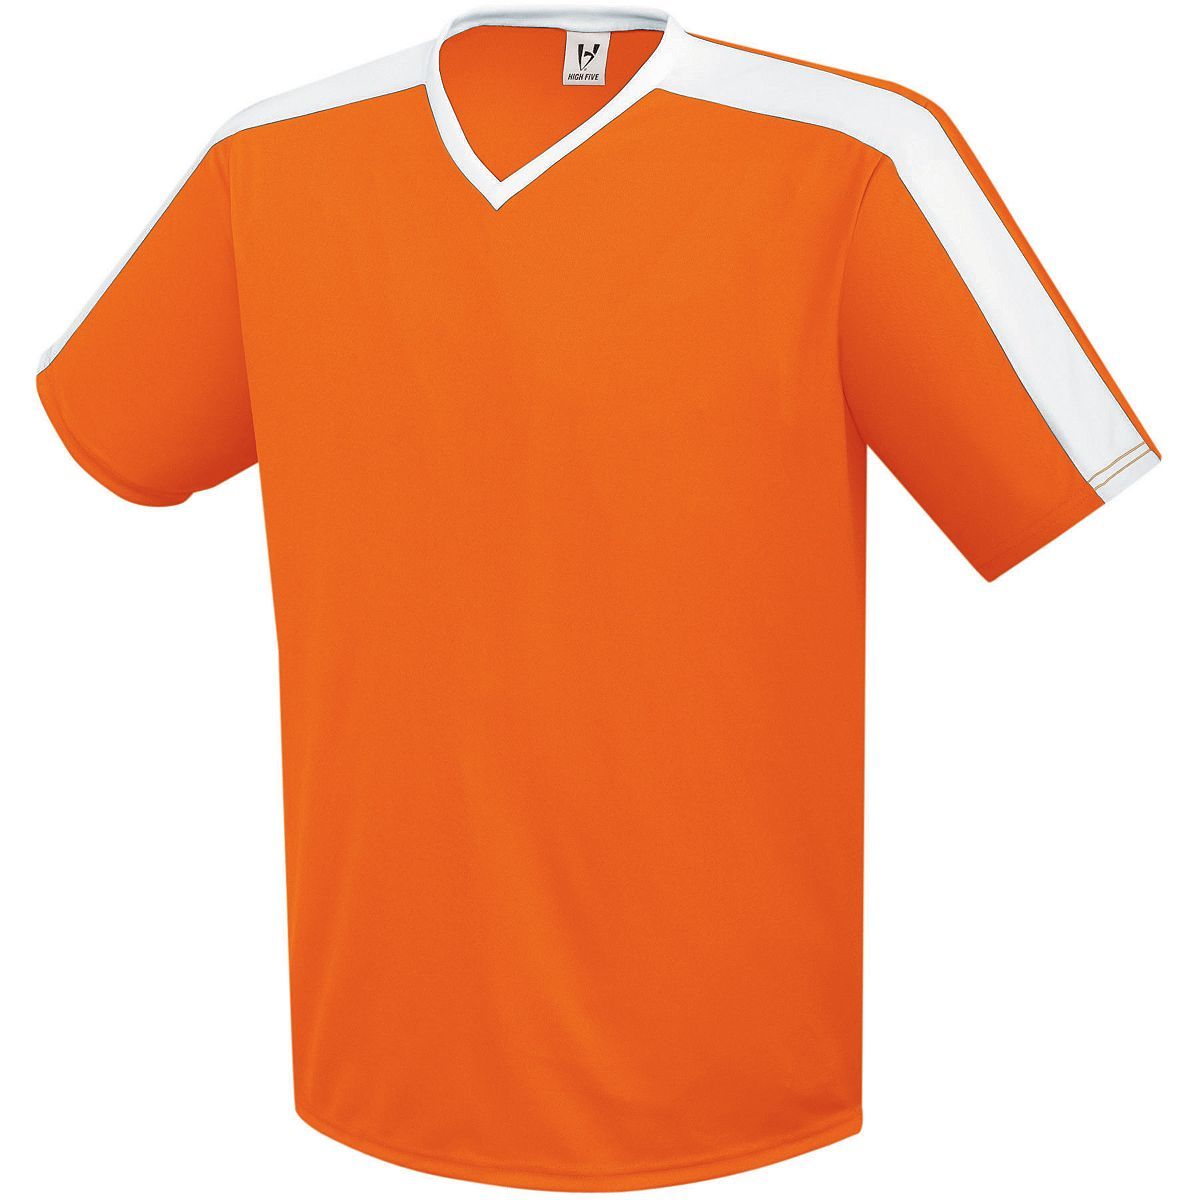 High 5 Youth Genesis Soccer Jersey in Orange/White  -Part of the Youth, Youth-Jersey, High5-Products, Soccer, Shirts, All-Sports-1 product lines at KanaleyCreations.com